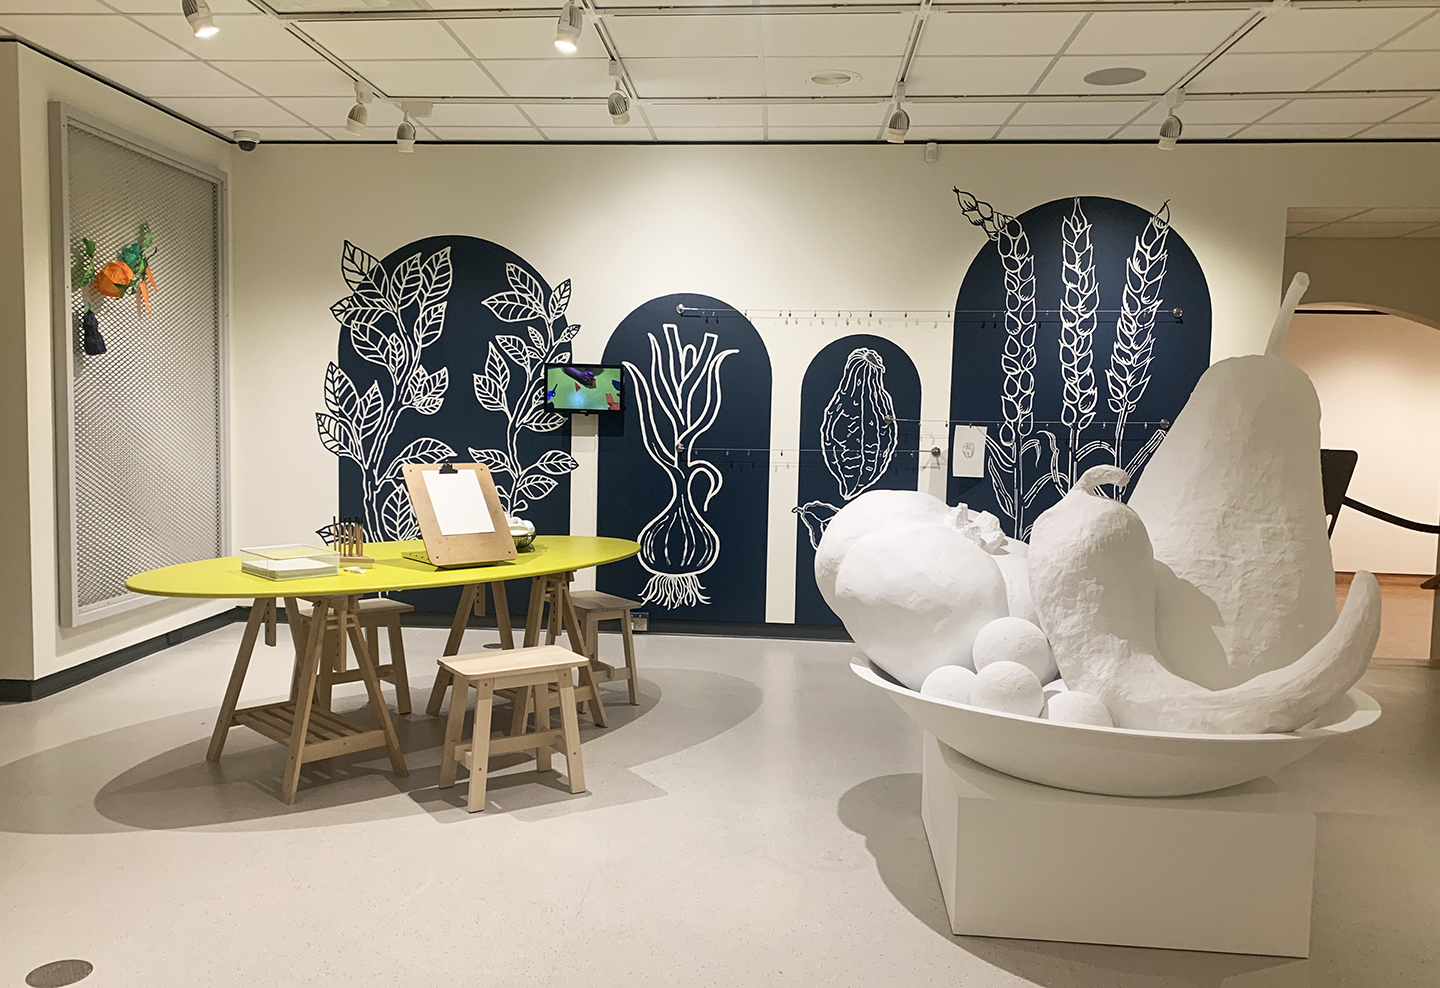 Art Park, the Museum's lower level interactive gallery is newly re-landscaped with hand-painted images of botanicals on the walls in blue and white paint and an oversized still life sculpture featuring an all white tomato, pear, pepper, and grapes surrounded by tables and chairs with drawing materials.